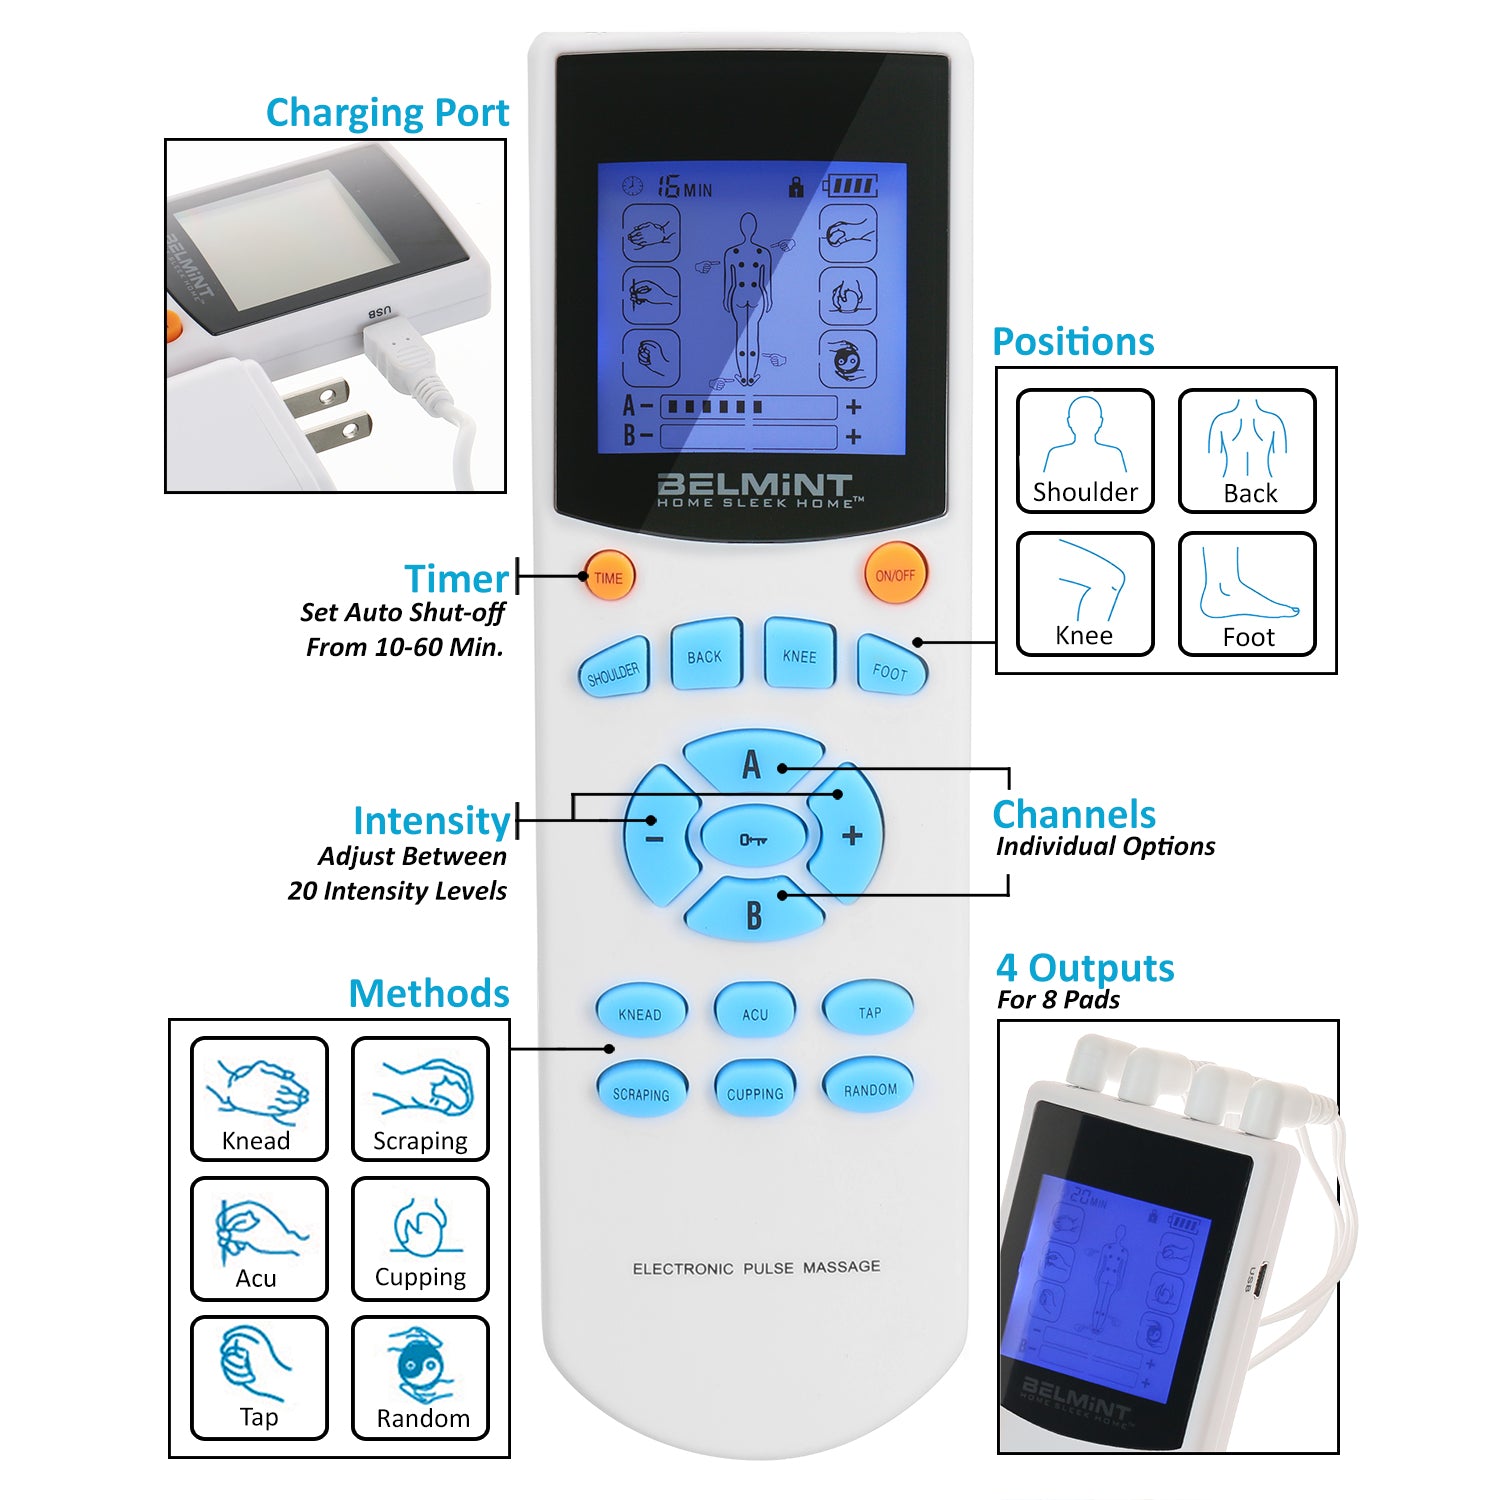 GLOBAL PHOENIX Electric Muscle Stimulator Dual Channels Pulse Massager Pain  Relief Therapy Tens Device with Electrode Pads Wires